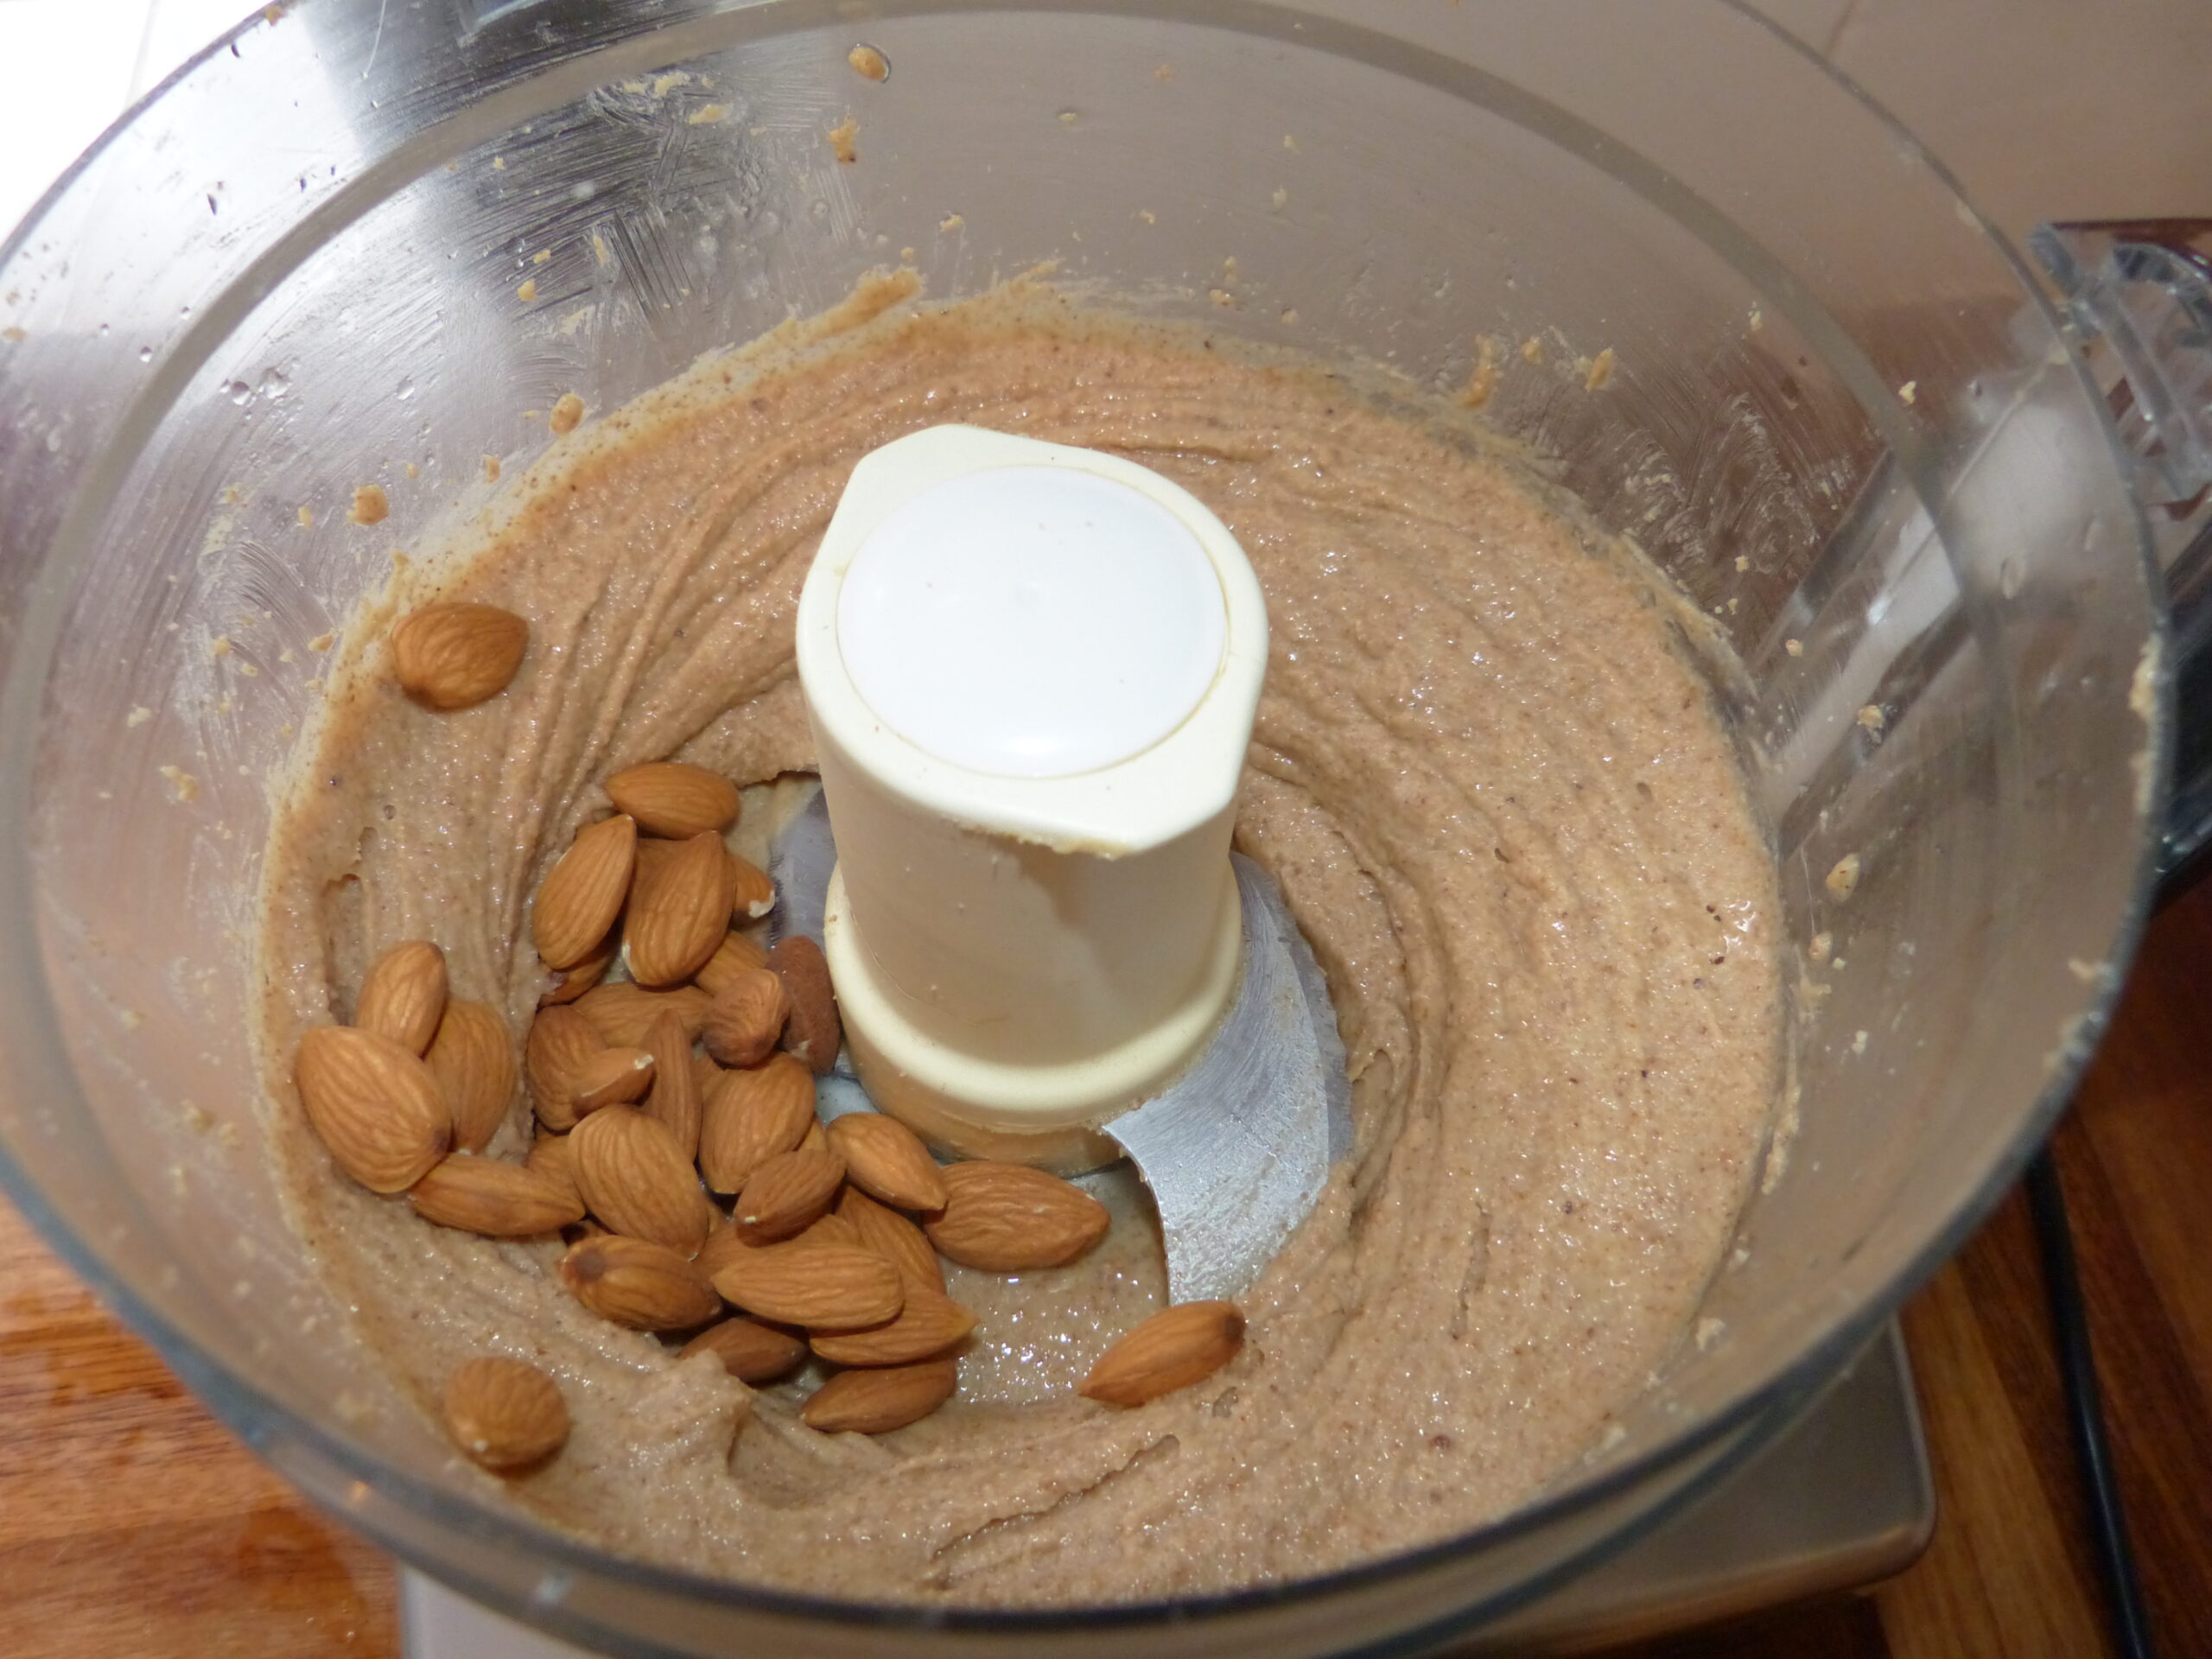 Almond butter - adding nuts